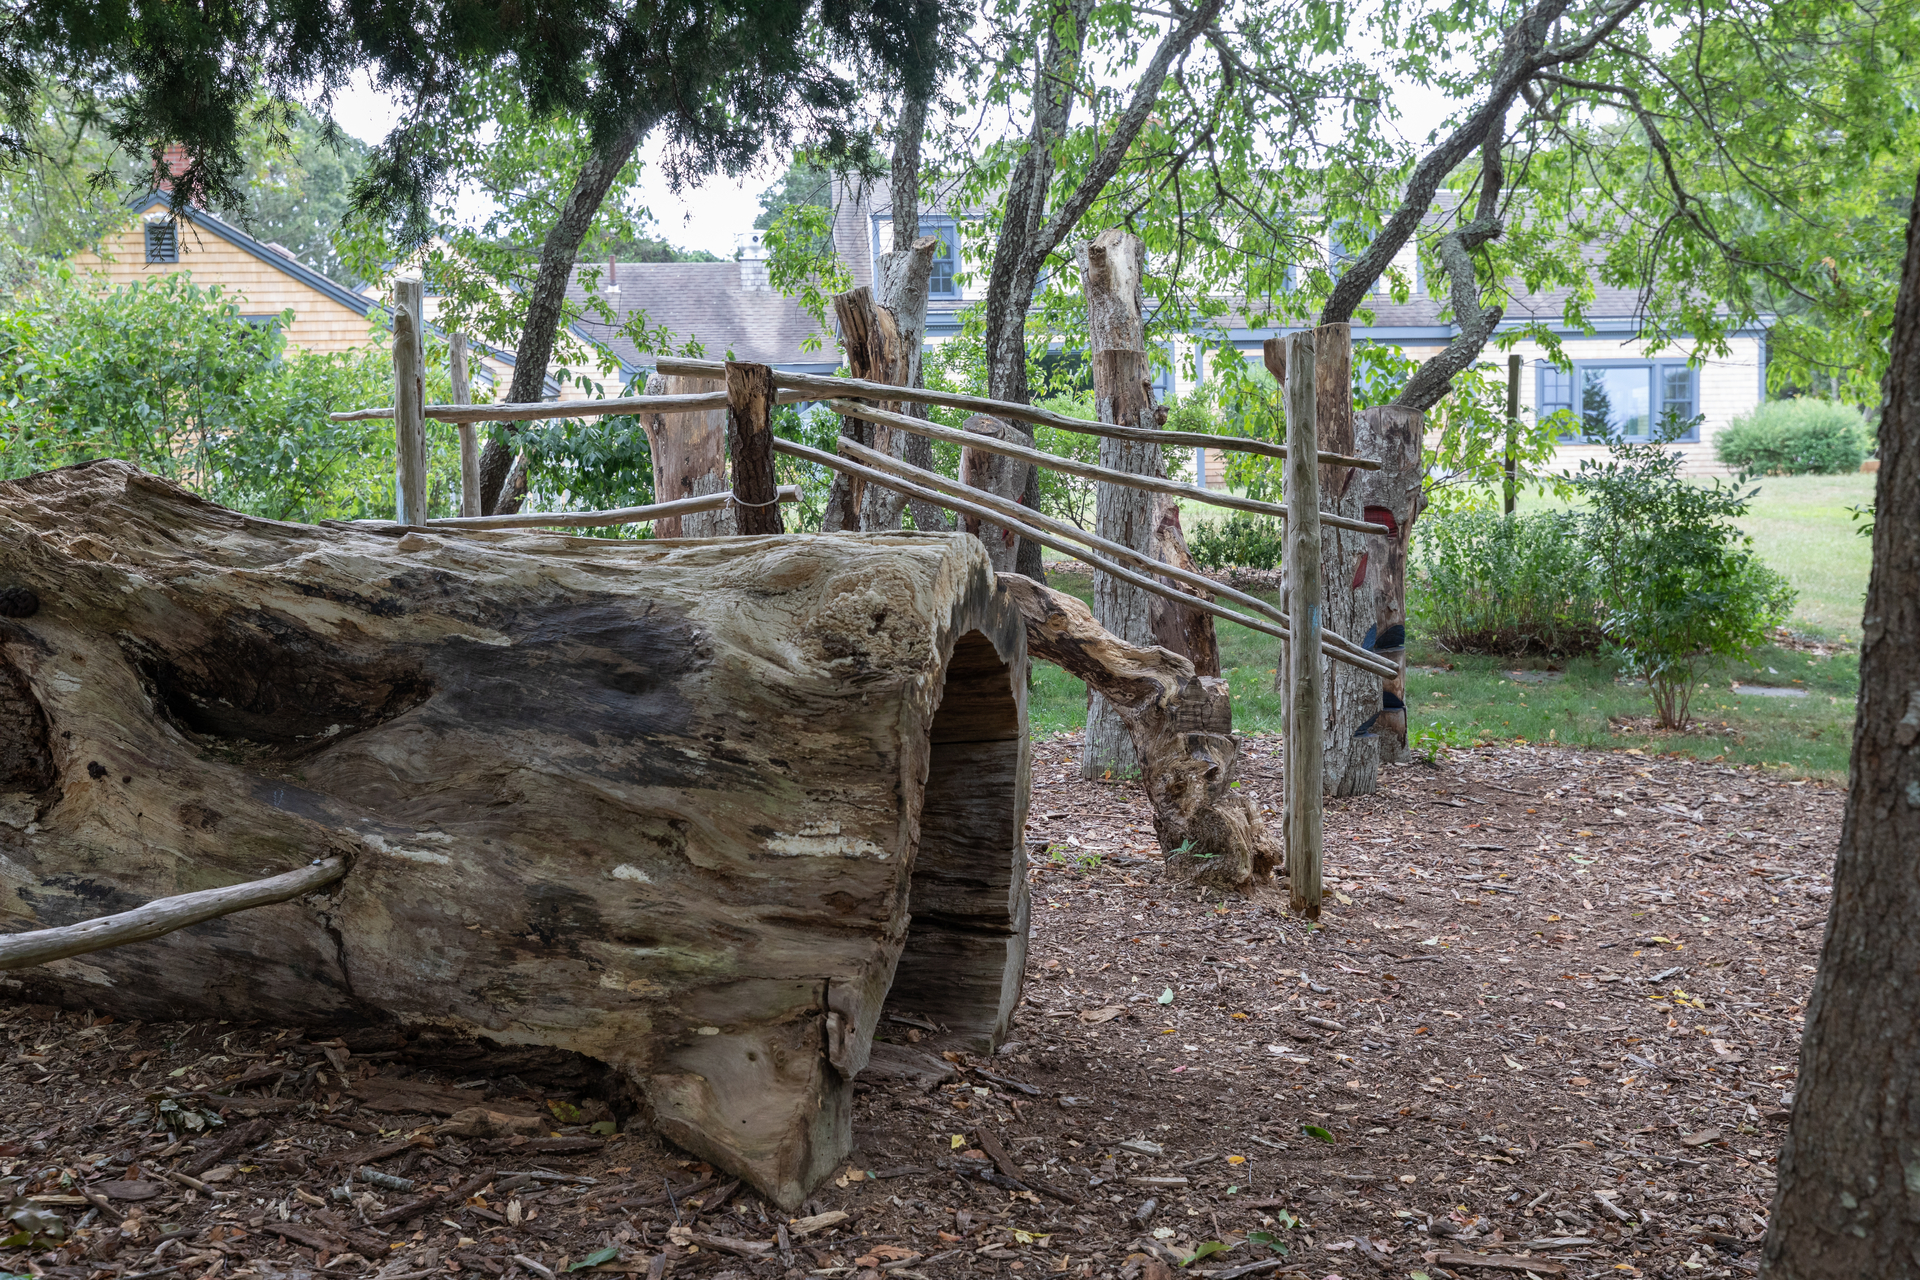 A tunnel through a fallen tree trunk and an obstacle made from logs.